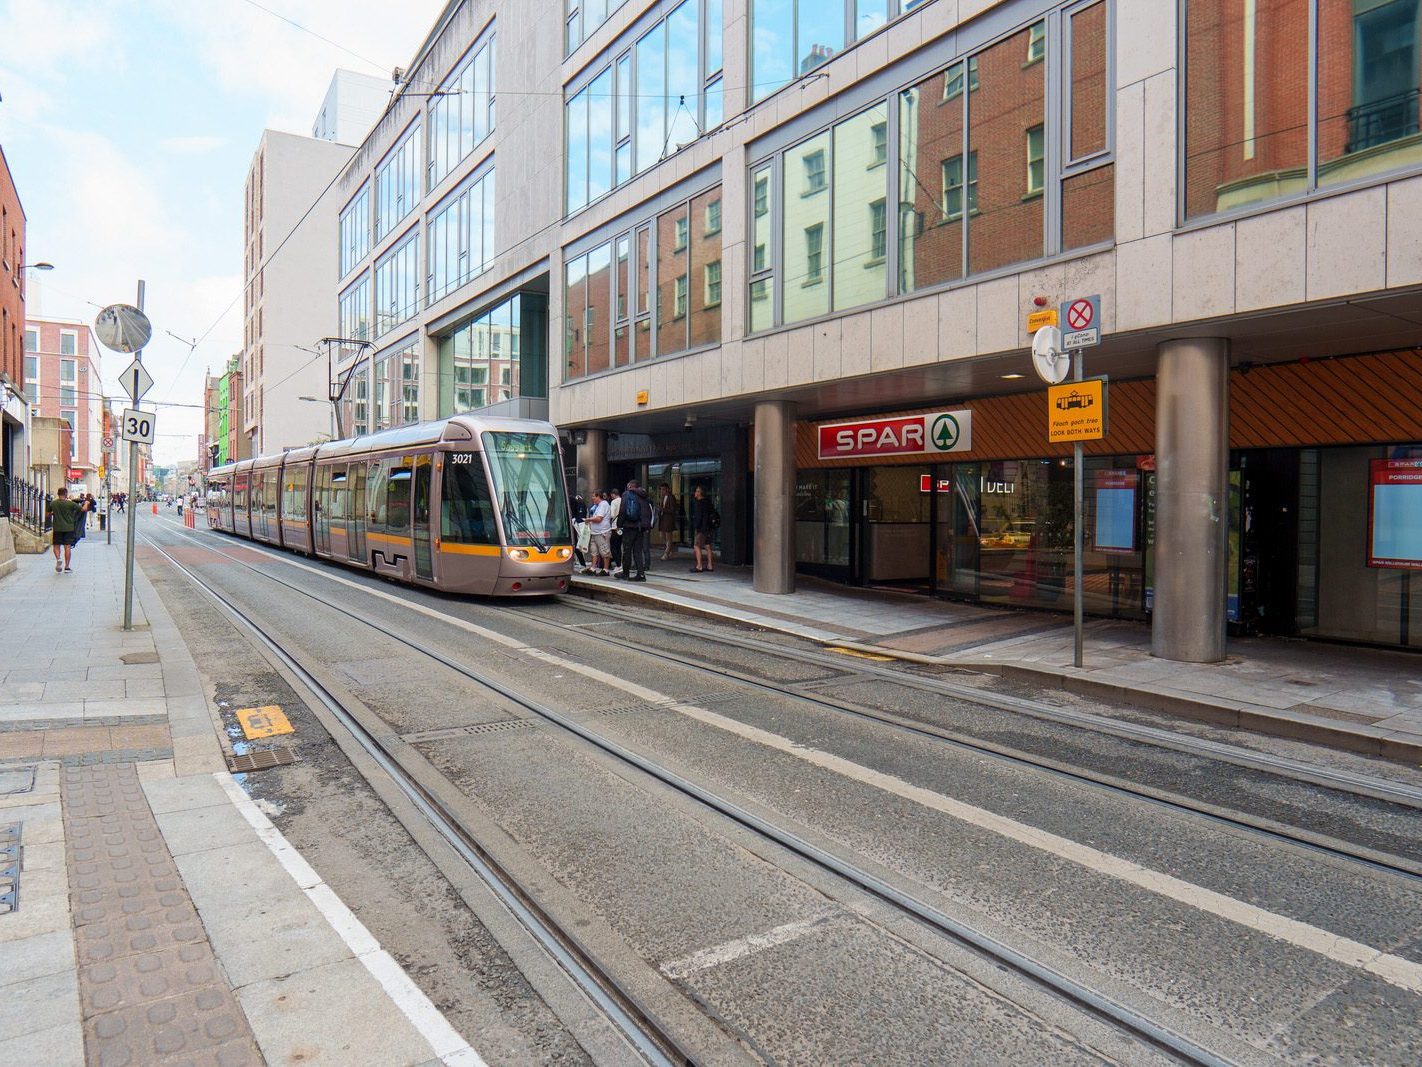 THE LUAS TRAM STOP [KNOWN AS JERVIS EVEN THOUGH IT IS ON UPPER ABBEY STREET] 005